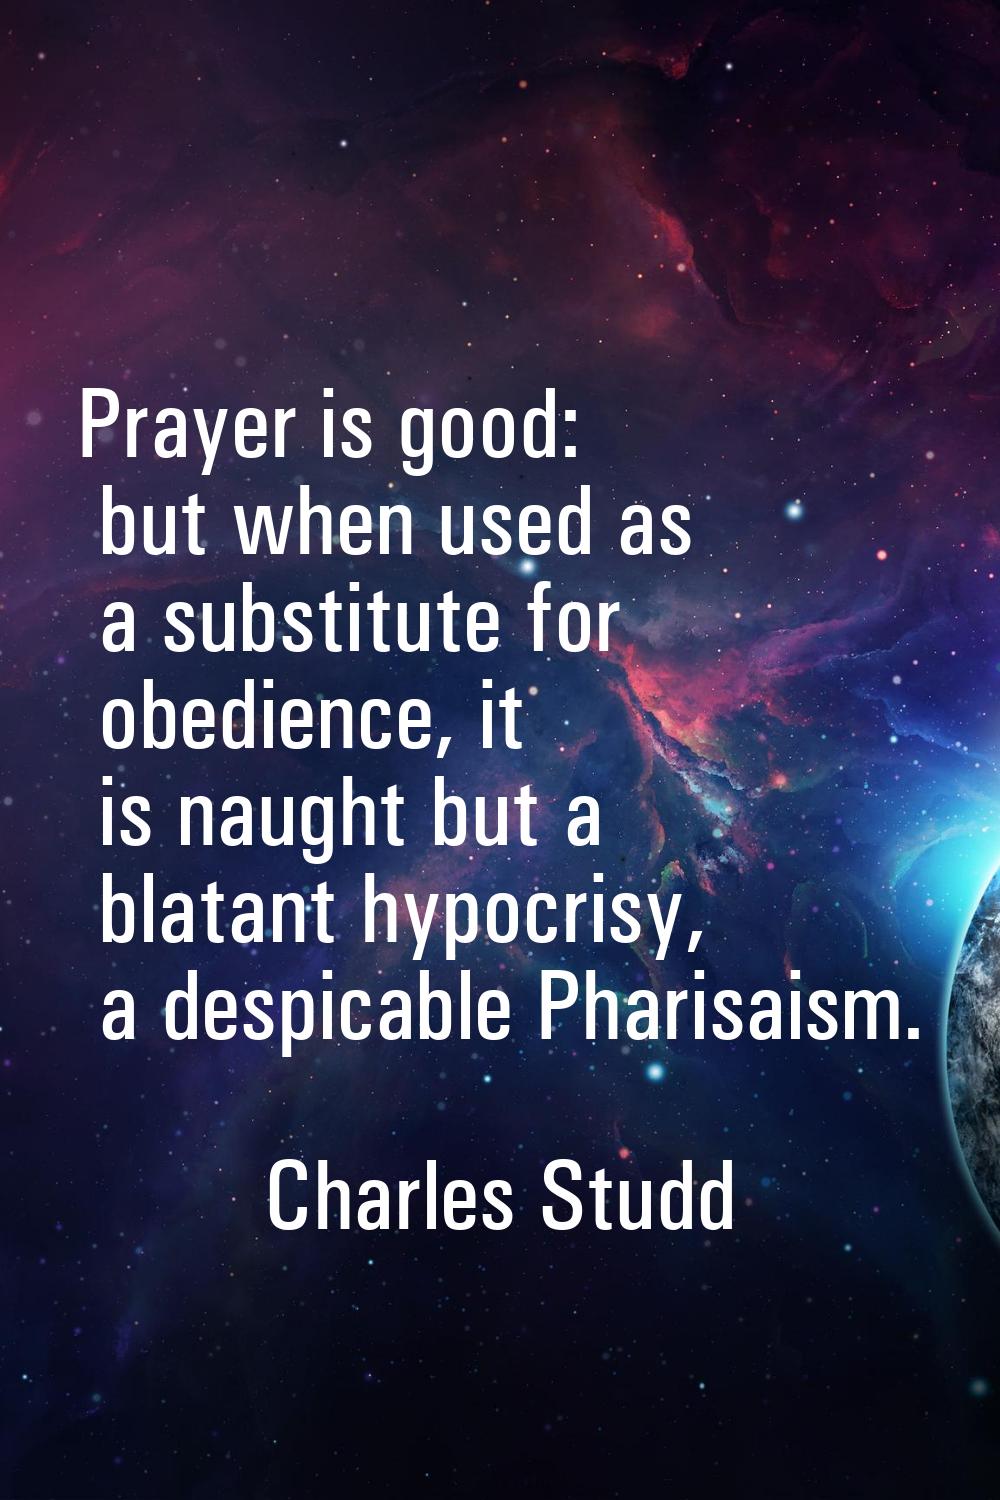 Prayer is good: but when used as a substitute for obedience, it is naught but a blatant hypocrisy, 